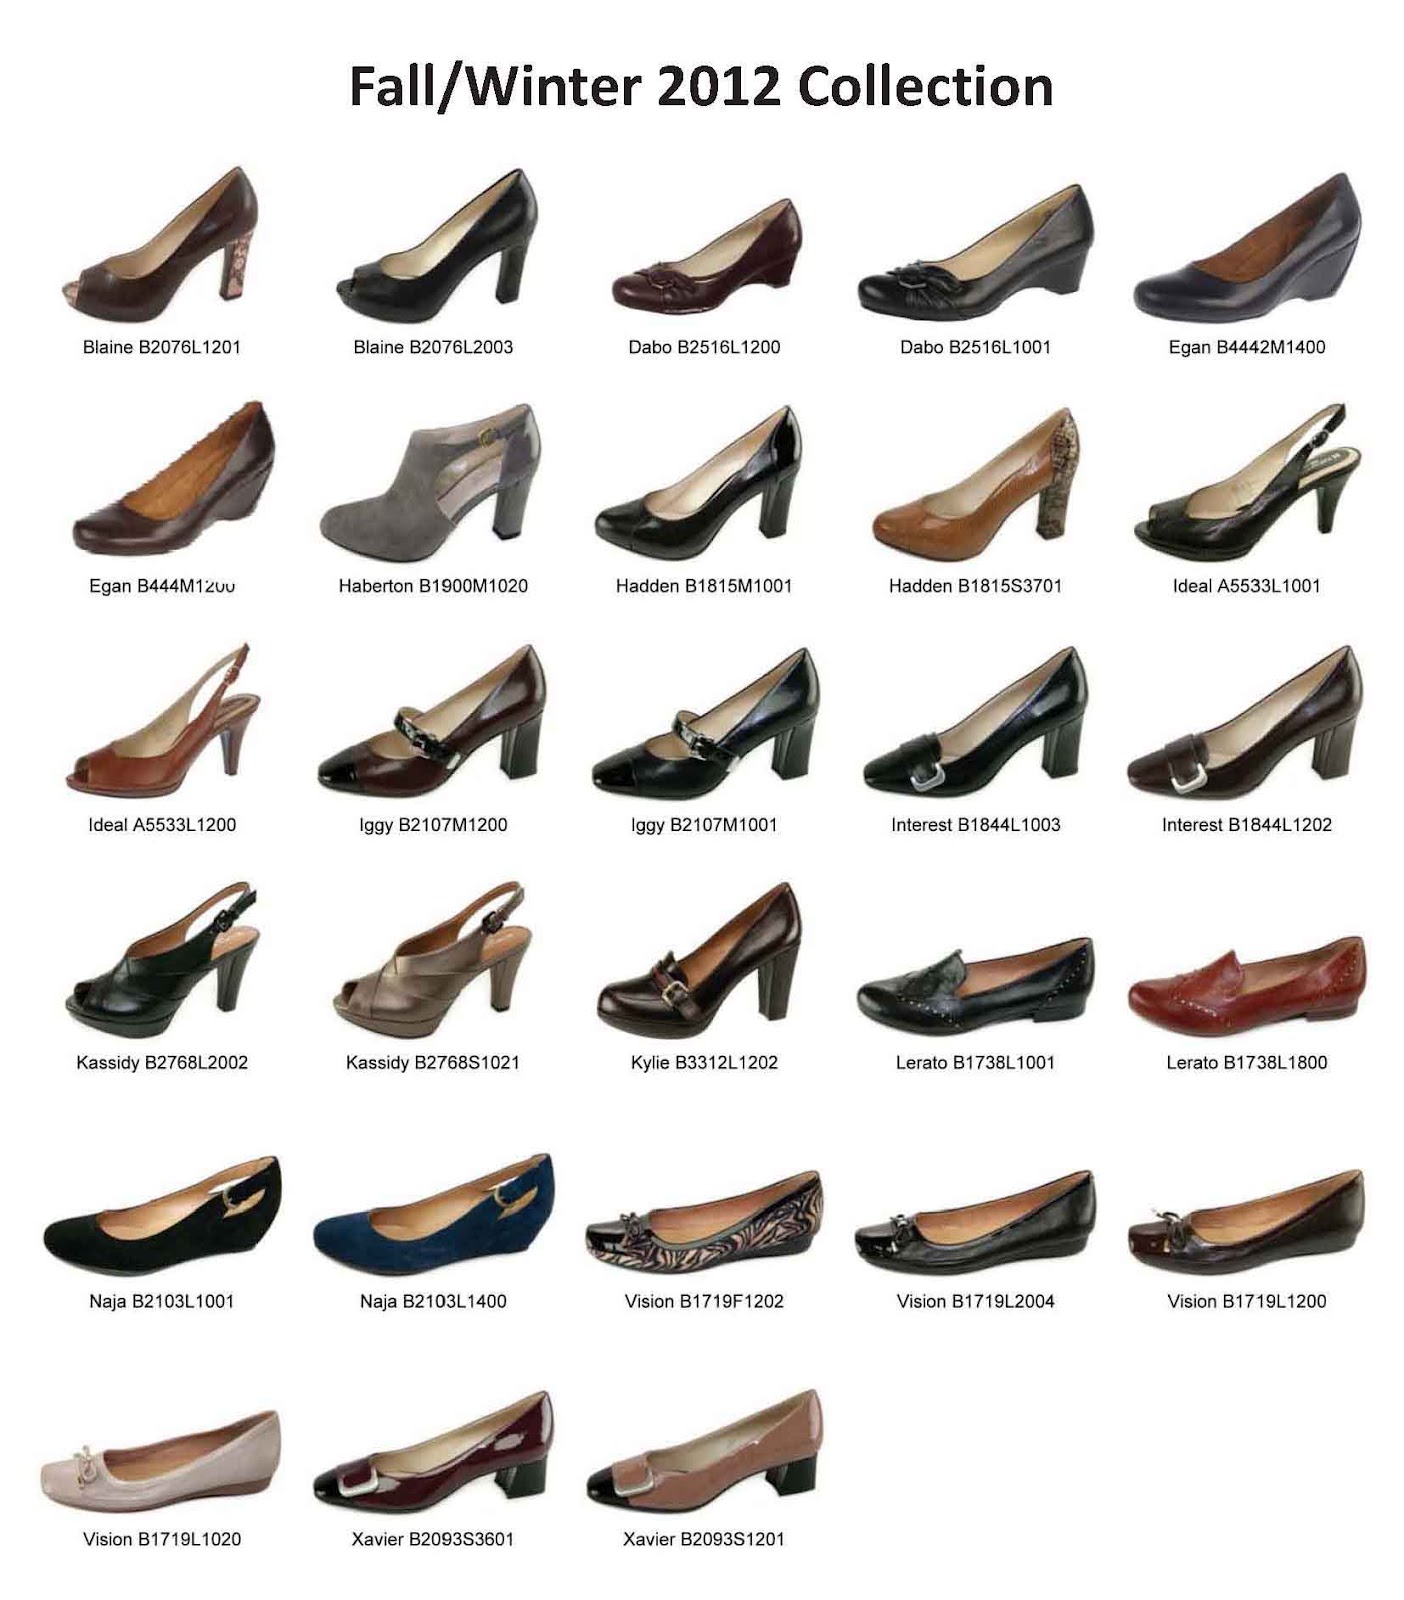 Trend Alert: Fall 2012 Collection of NaturalizerÂ® Footwear